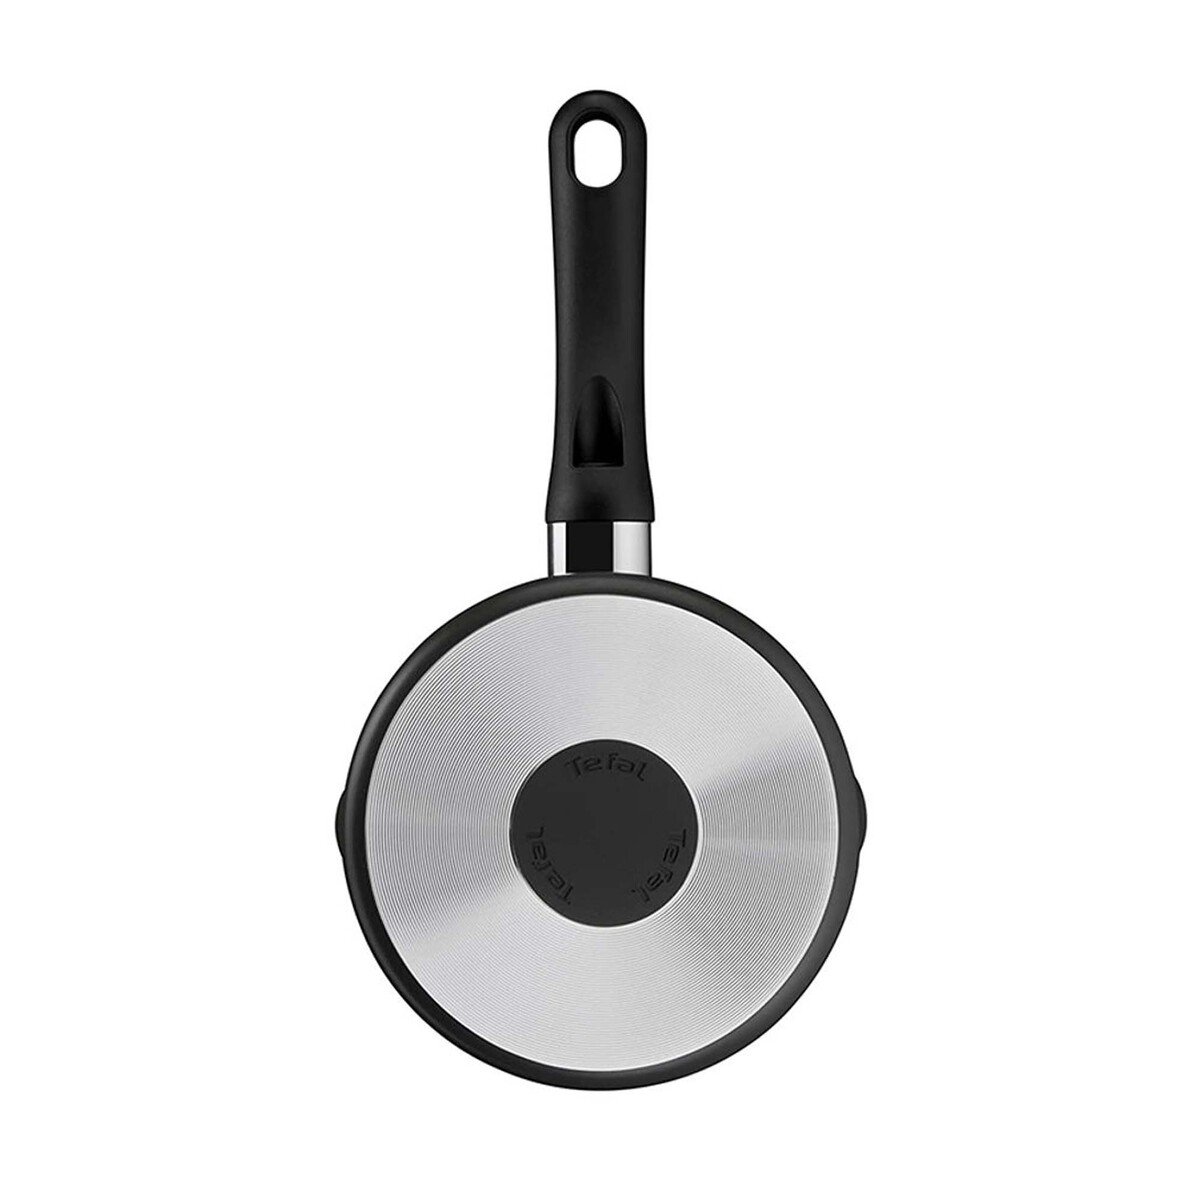 Tefal G6 Delicia Tawa + Delicia Sauce Pan With Glass Lid, 28+16 cm, Black